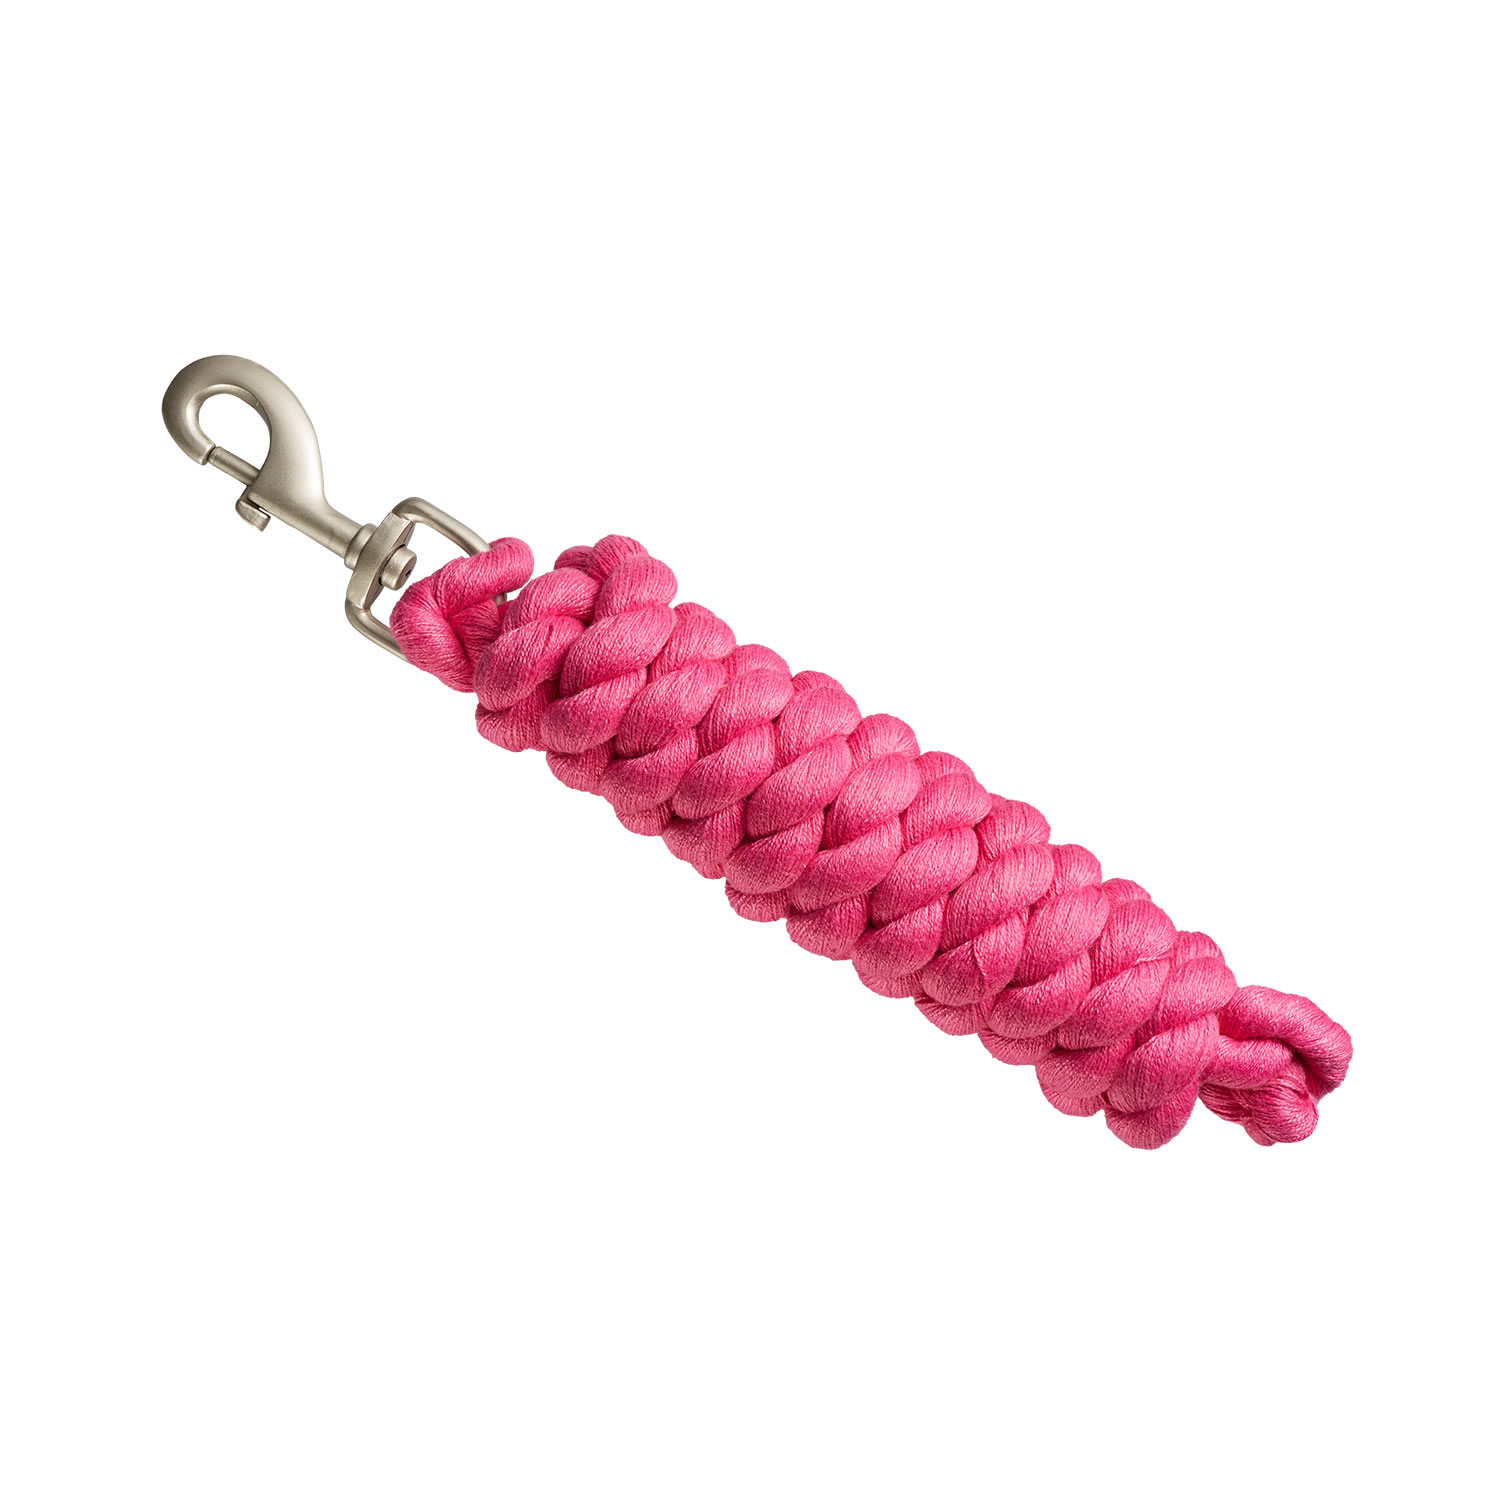 BITZ BASIC LEAD ROPE WITH TRIGGER CLIP PINK